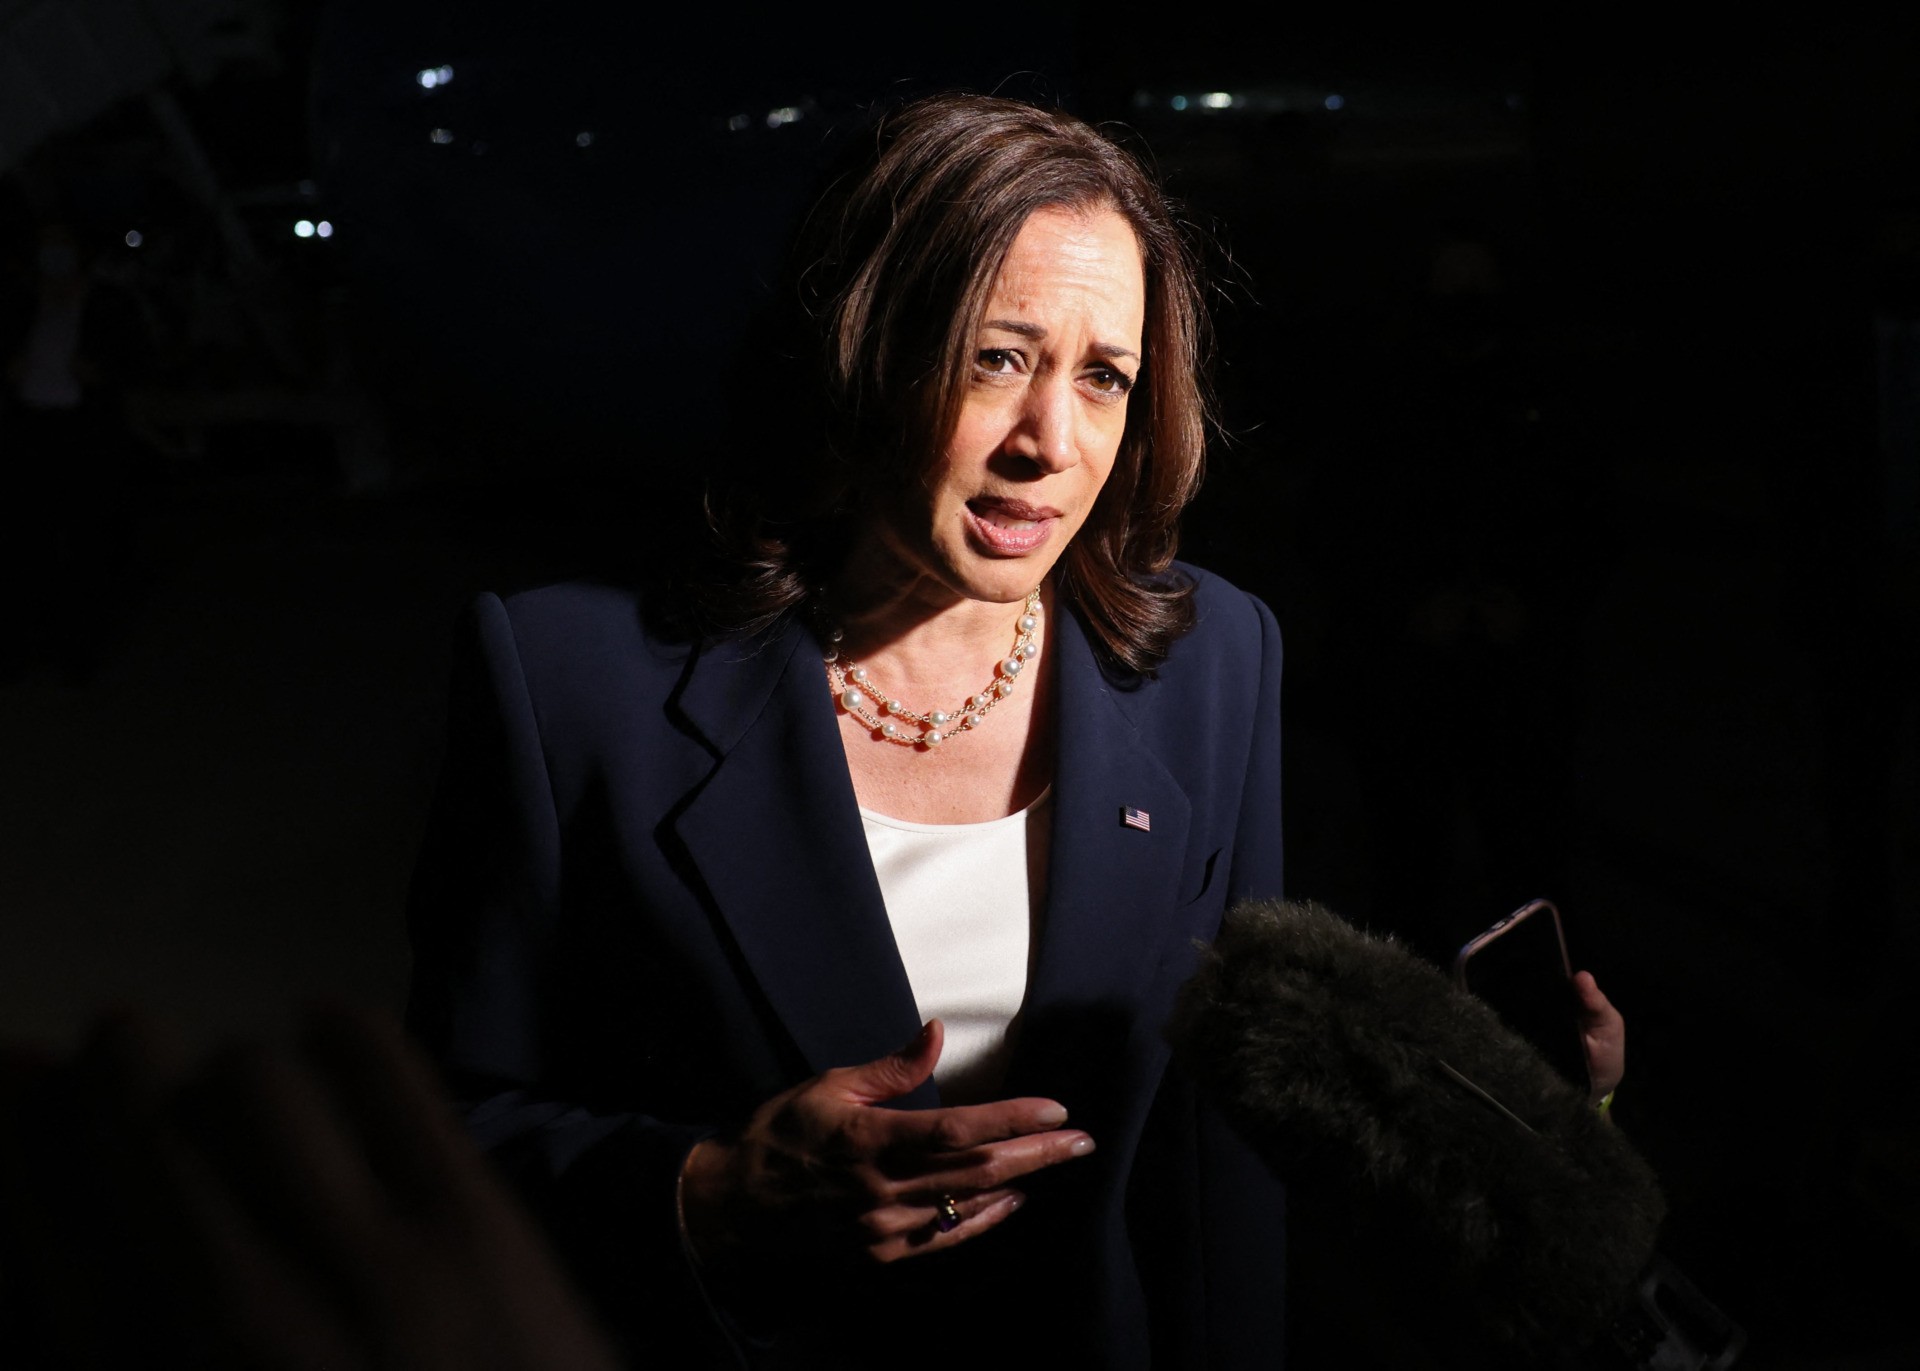 US Vice President Kamala Harris speaks before departing for travel to Southeast Asia, her first trip to this region as vice president to meet with government, private sector, and civil society leaders, at Joint Base Andrews in Maryland, August 20, 2021. (Photo by EVELYN HOCKSTEIN / POOL / AFP) (Photo by EVELYN HOCKSTEIN/POOL/AFP via Getty Images)